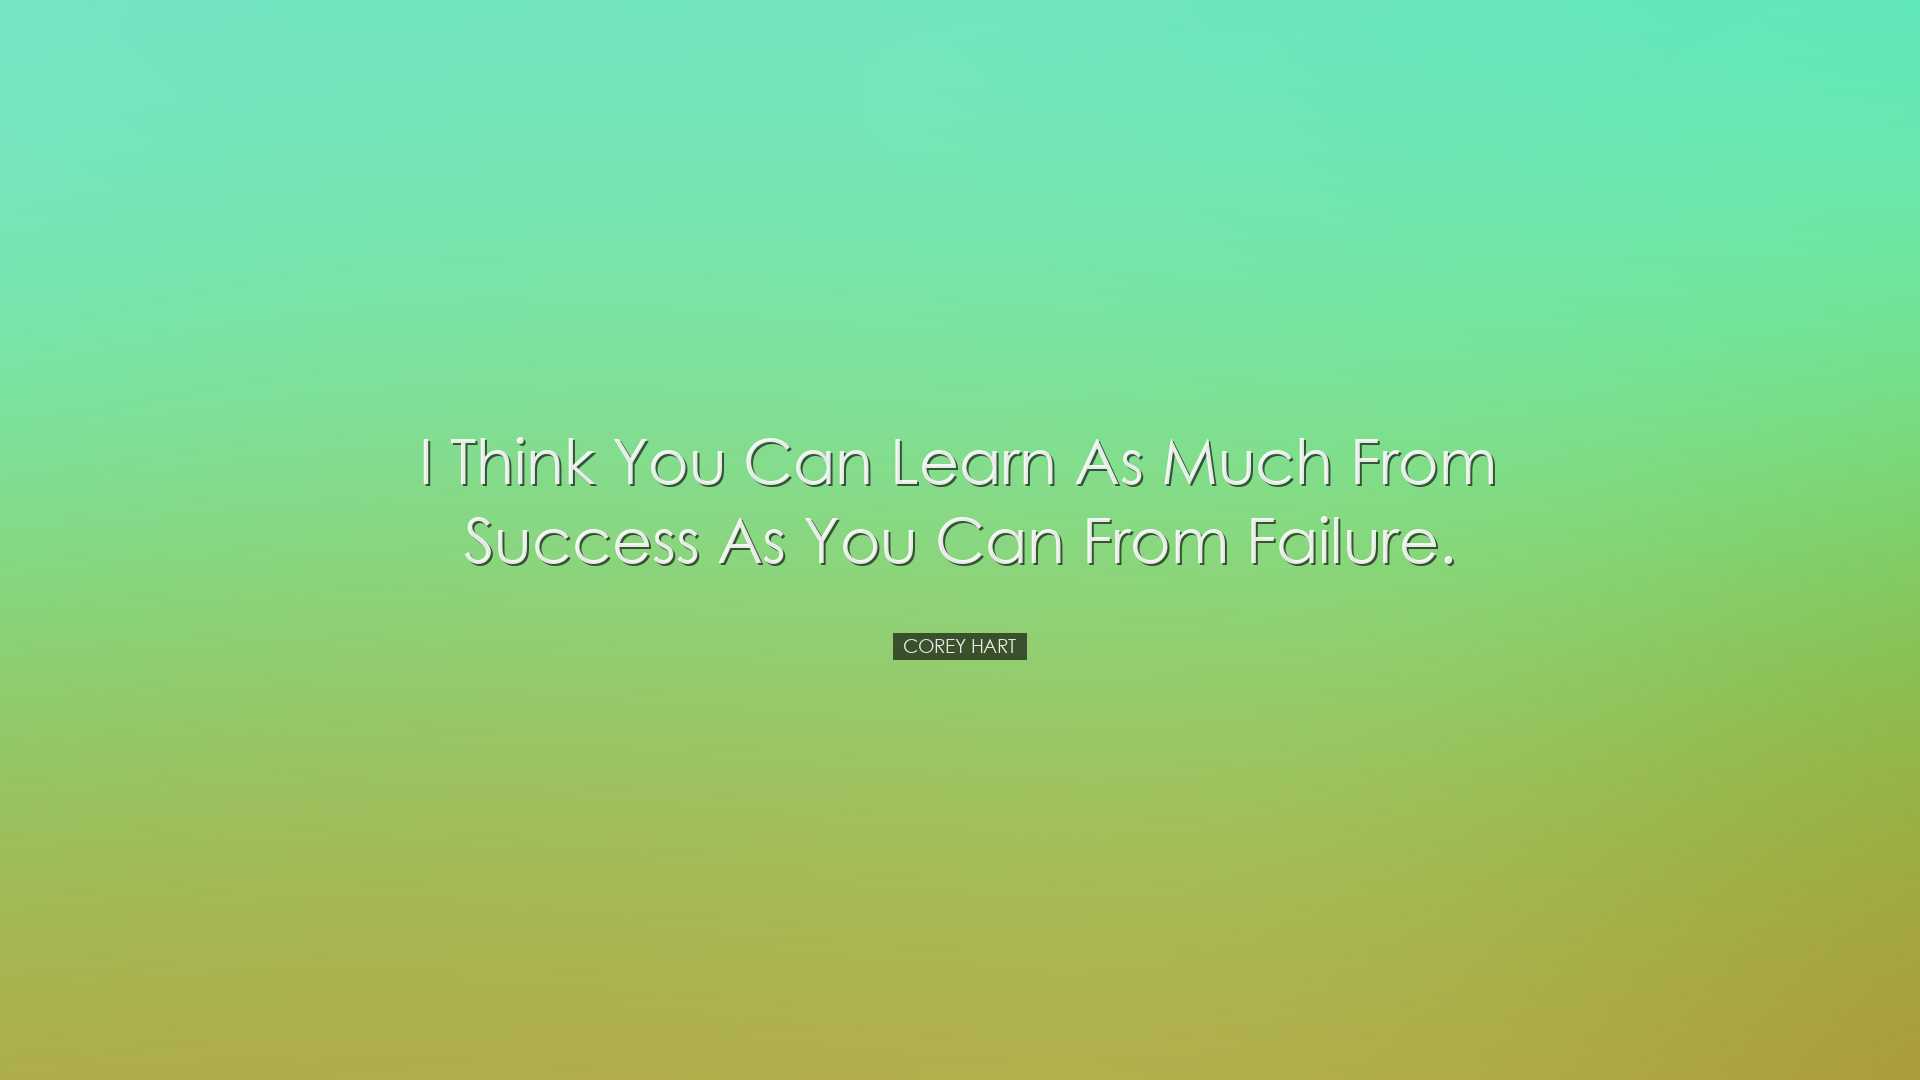 I think you can learn as much from success as you can from failure